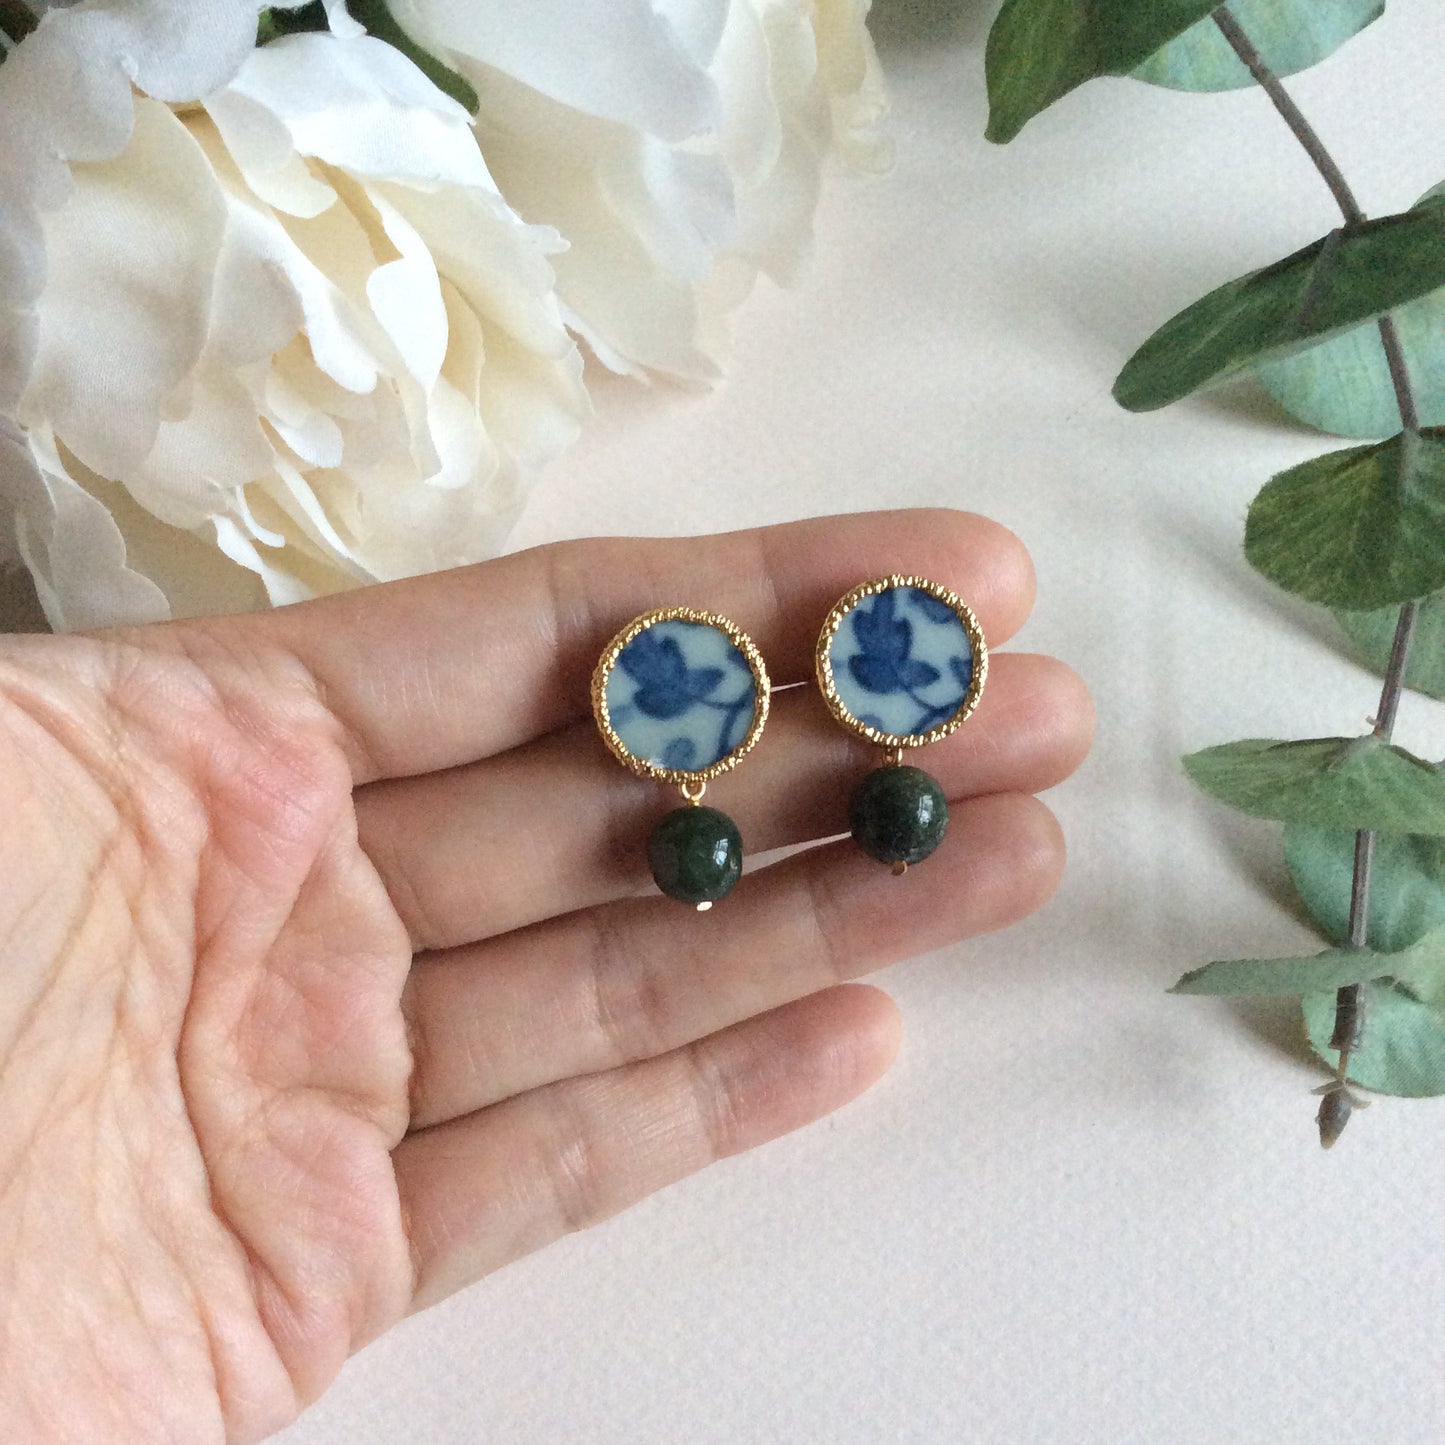 Chinoiserie porcelain stud earrings with jade drops